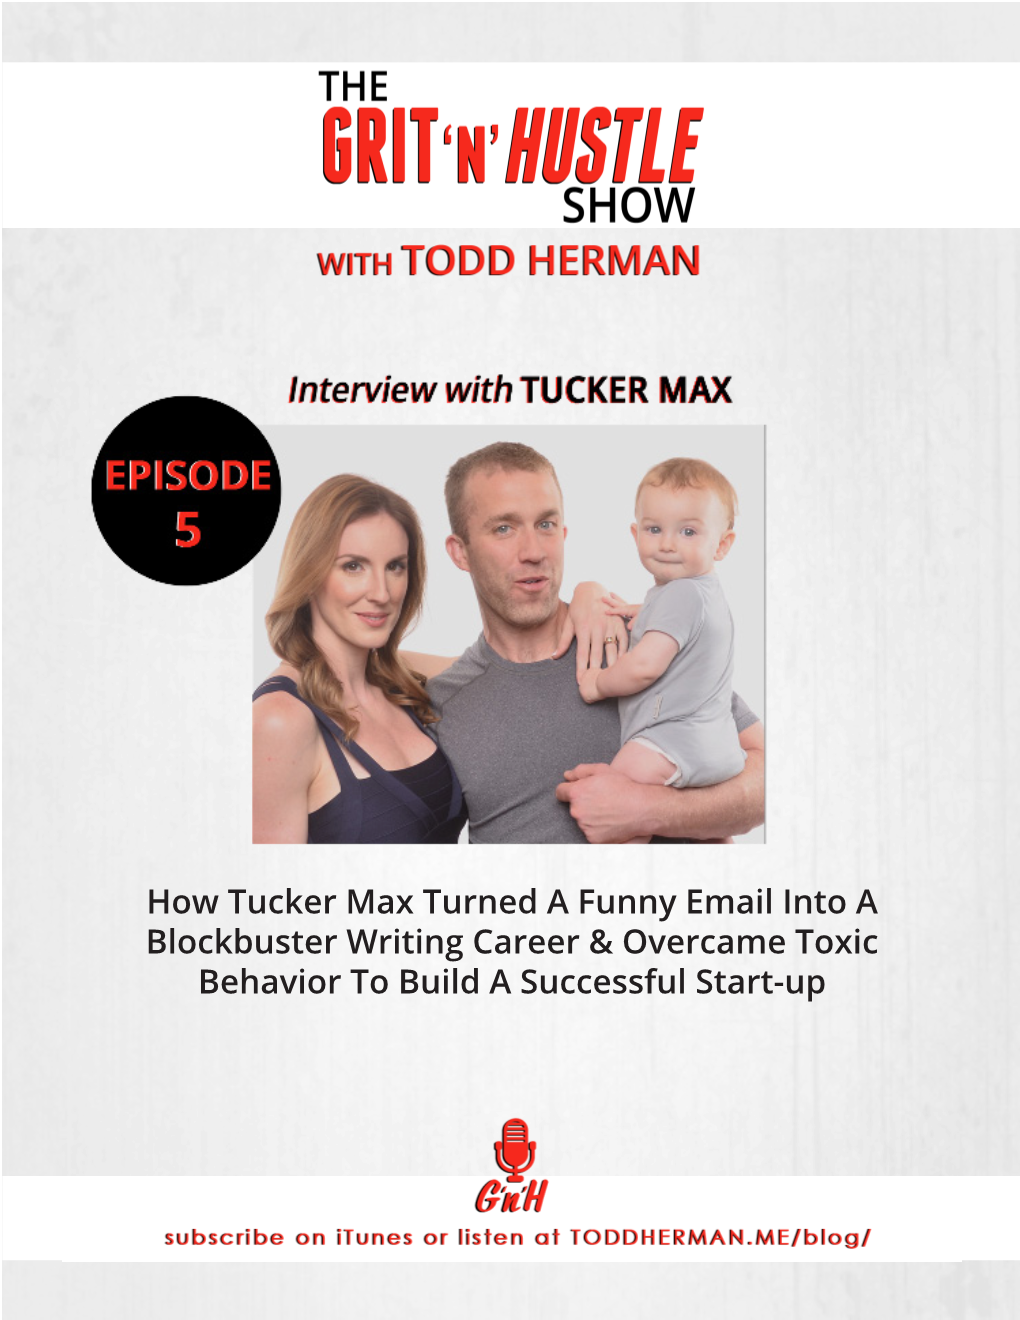 How Tucker Max Turned a Funny Email Into a Blockbuster Writing Career & Overcame Toxic Behavior to Build a Successful Start-Up ABOUT TODD HERMAN